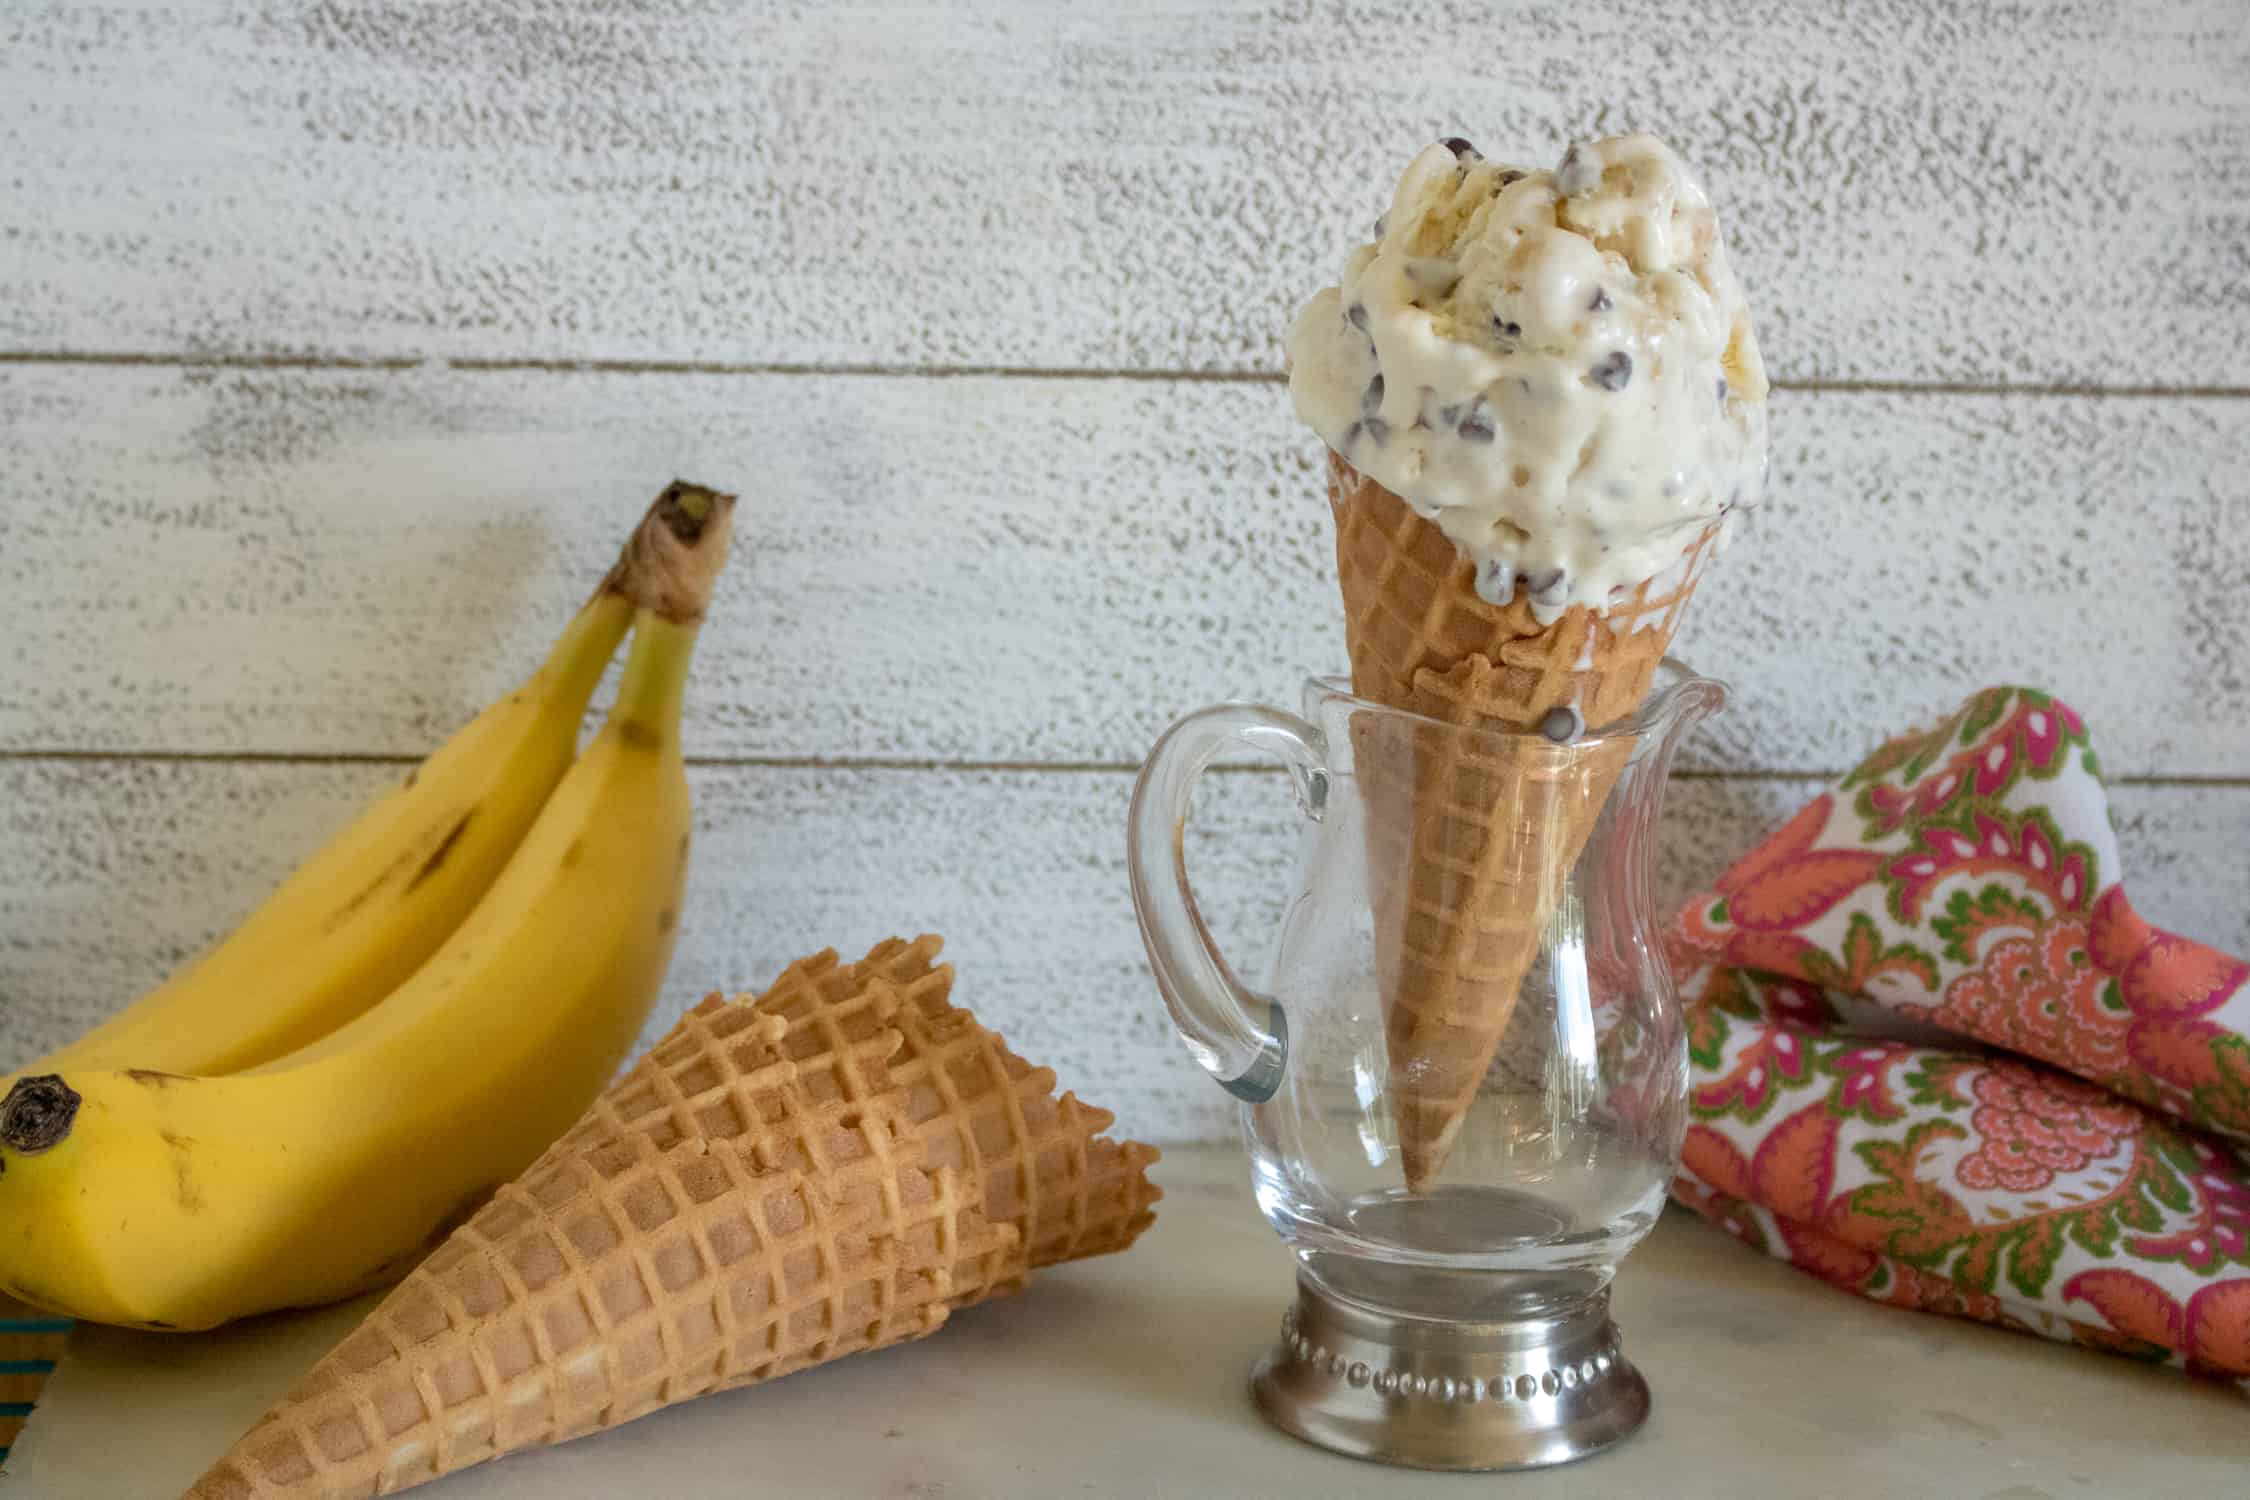 A waffle cone with a scoop of No-Churn Banana Chocolate Chip Ice cream standing in a glass cup on a table next to bananas, ice cream cones and a red patterned kitchen towel